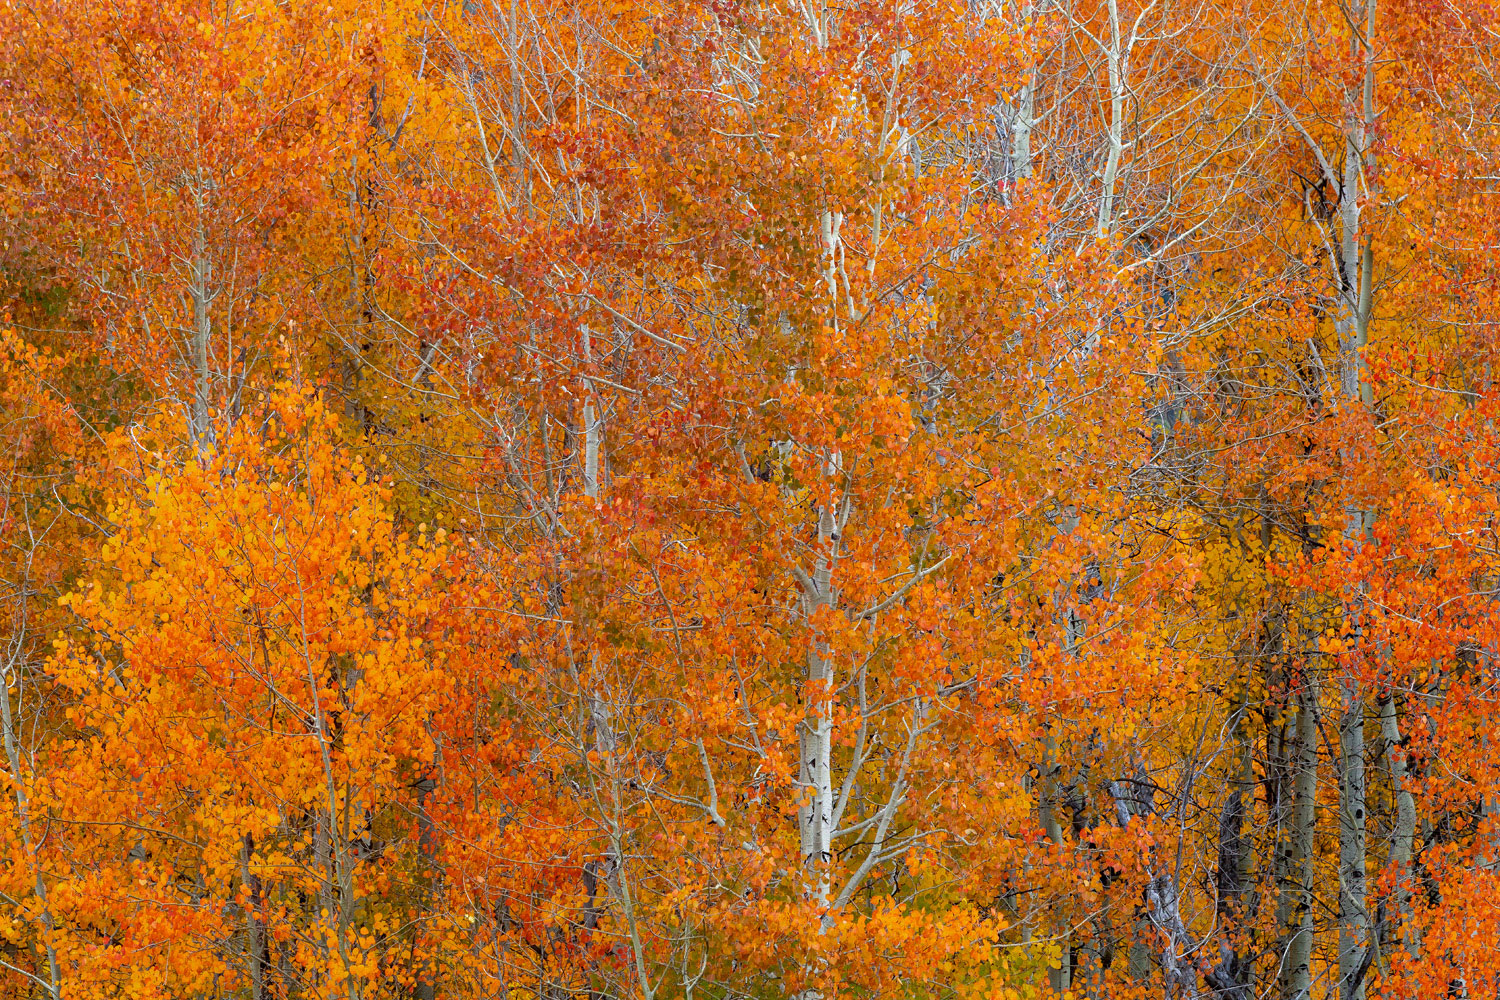 Most aspen turn yellow and golden in autumn but when conditions are right a select few can turn a fiery orange.